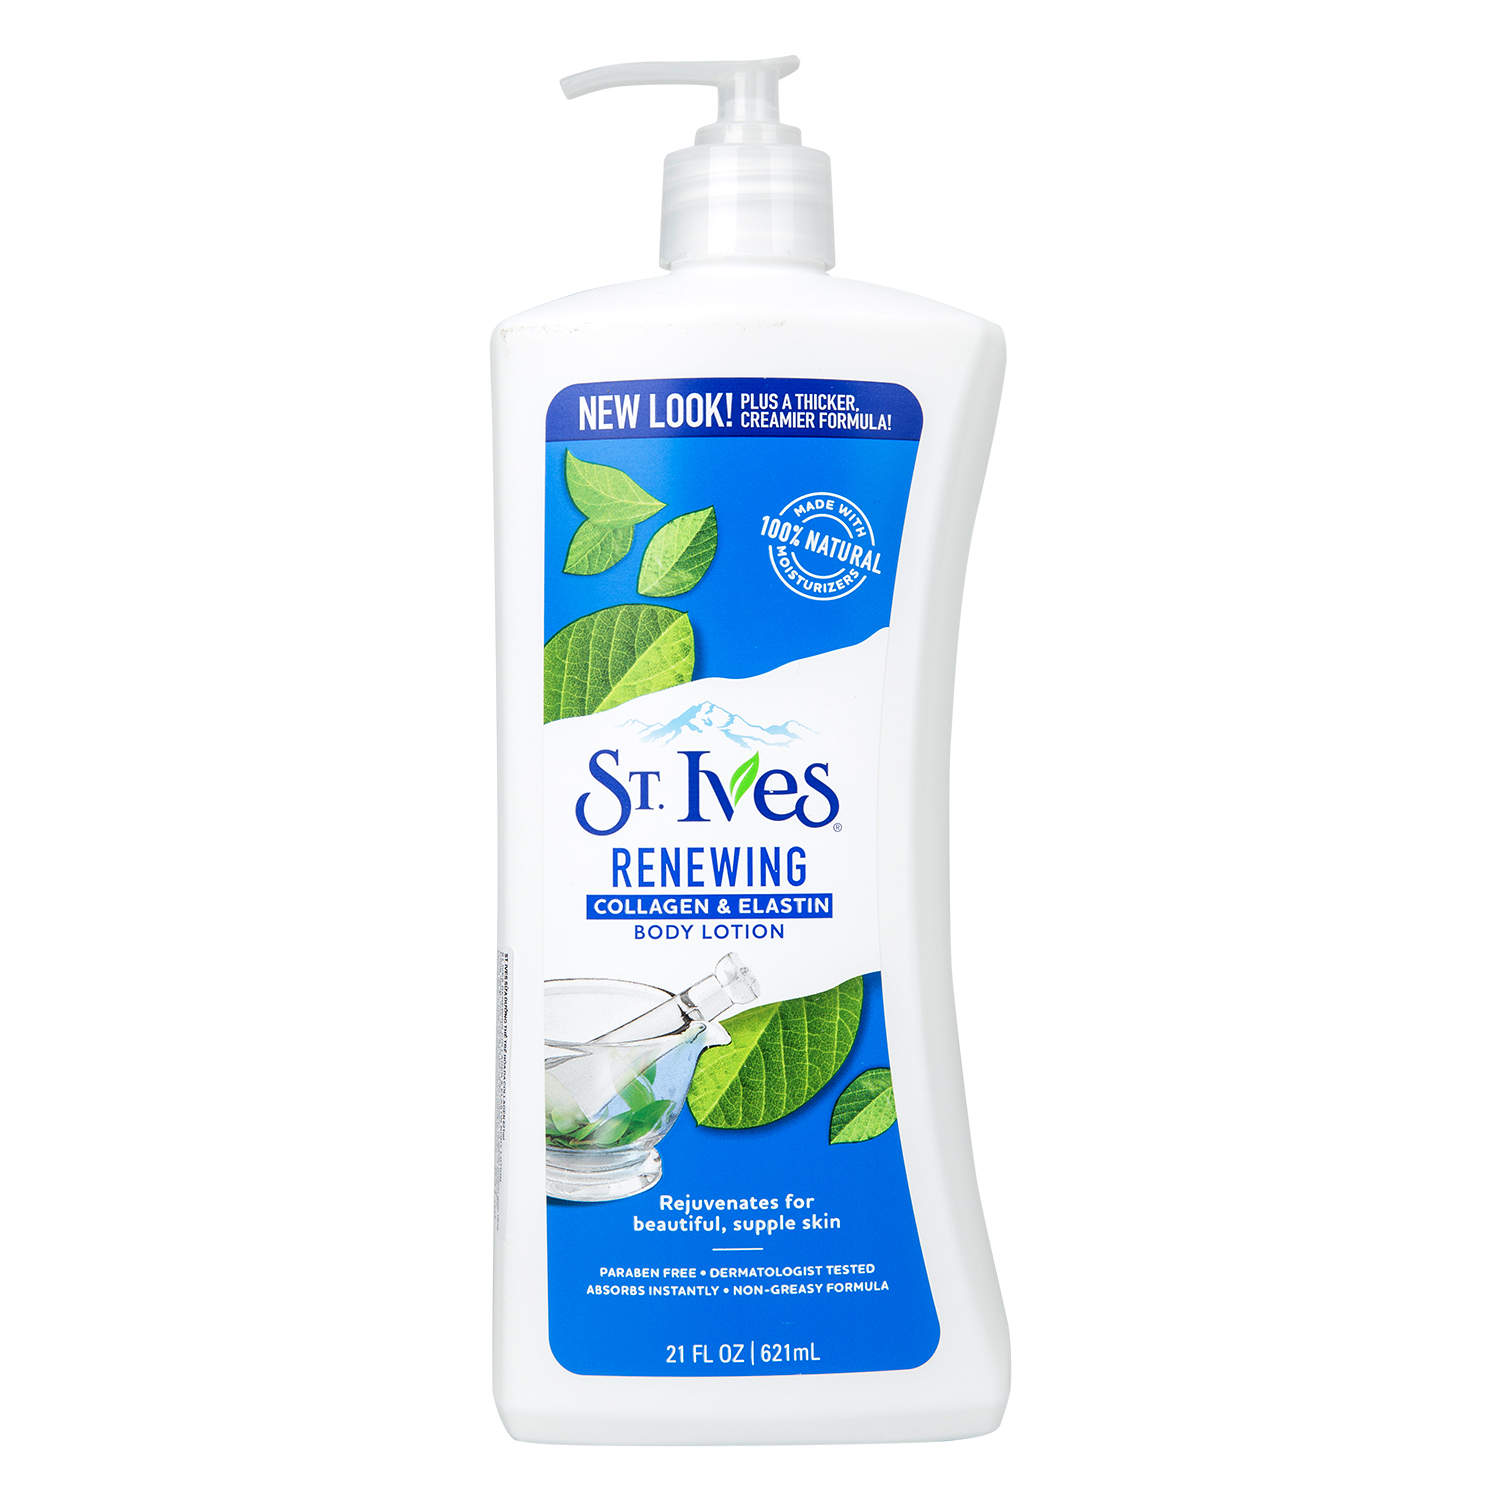 St.Ives Body Lotion 621ml